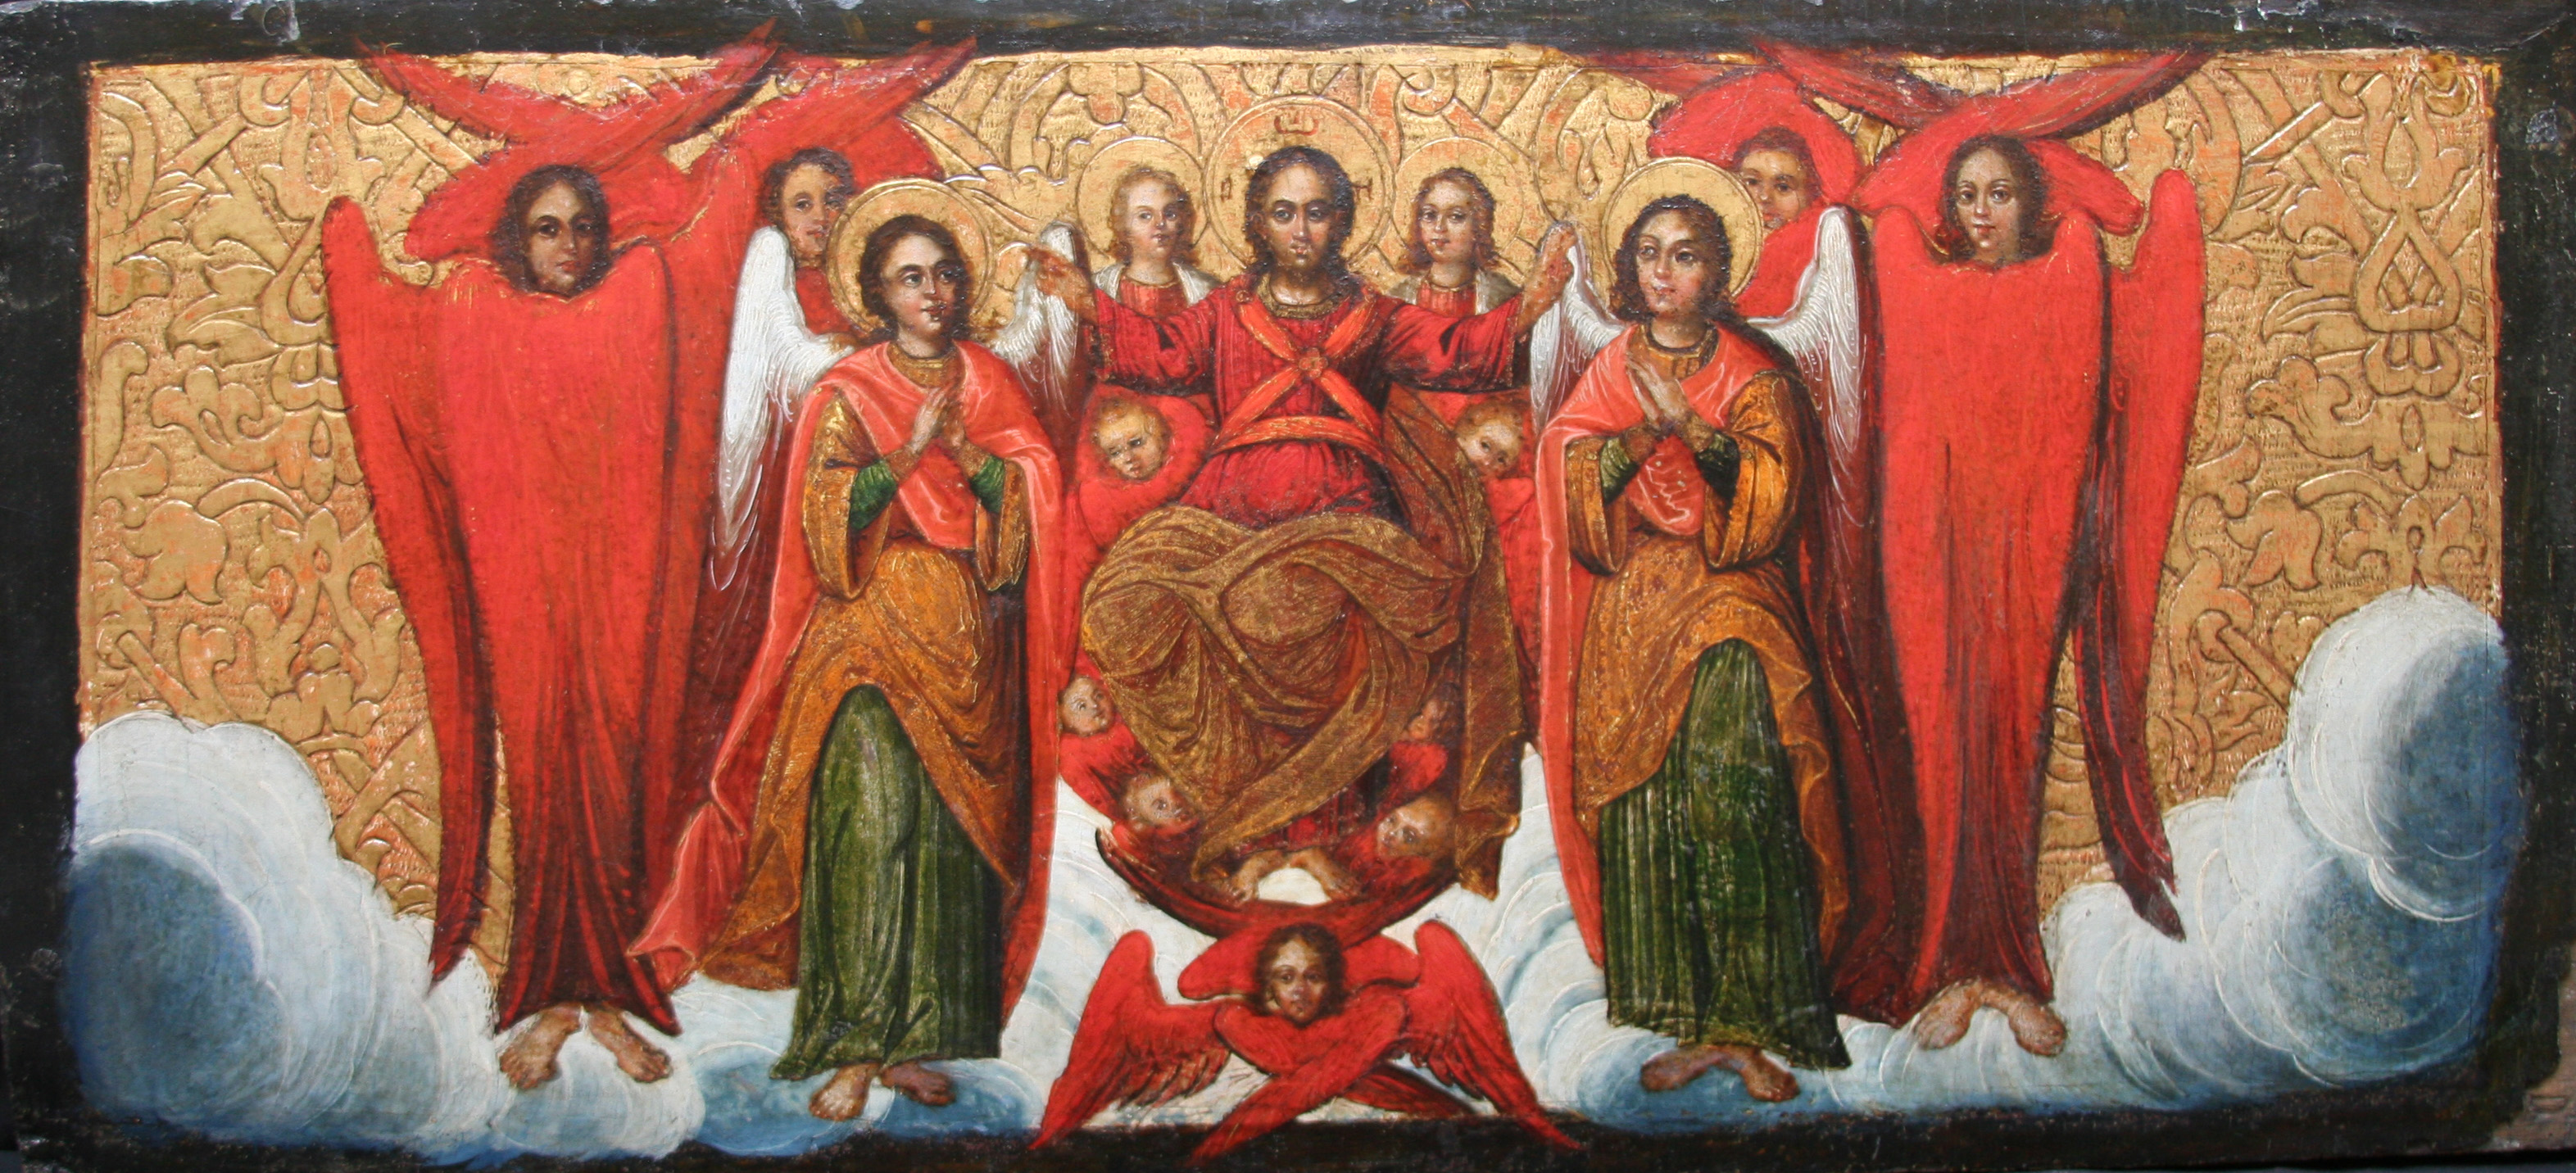 Ivan Rutkovych. Christ in Glory. Icon from the additional tier of the Zhovkva iconostasis. 1697–99. Andrei Sheptytskyi National Museum in Lviv (source: Andrei Sheptytskyi National Museum in Lviv).